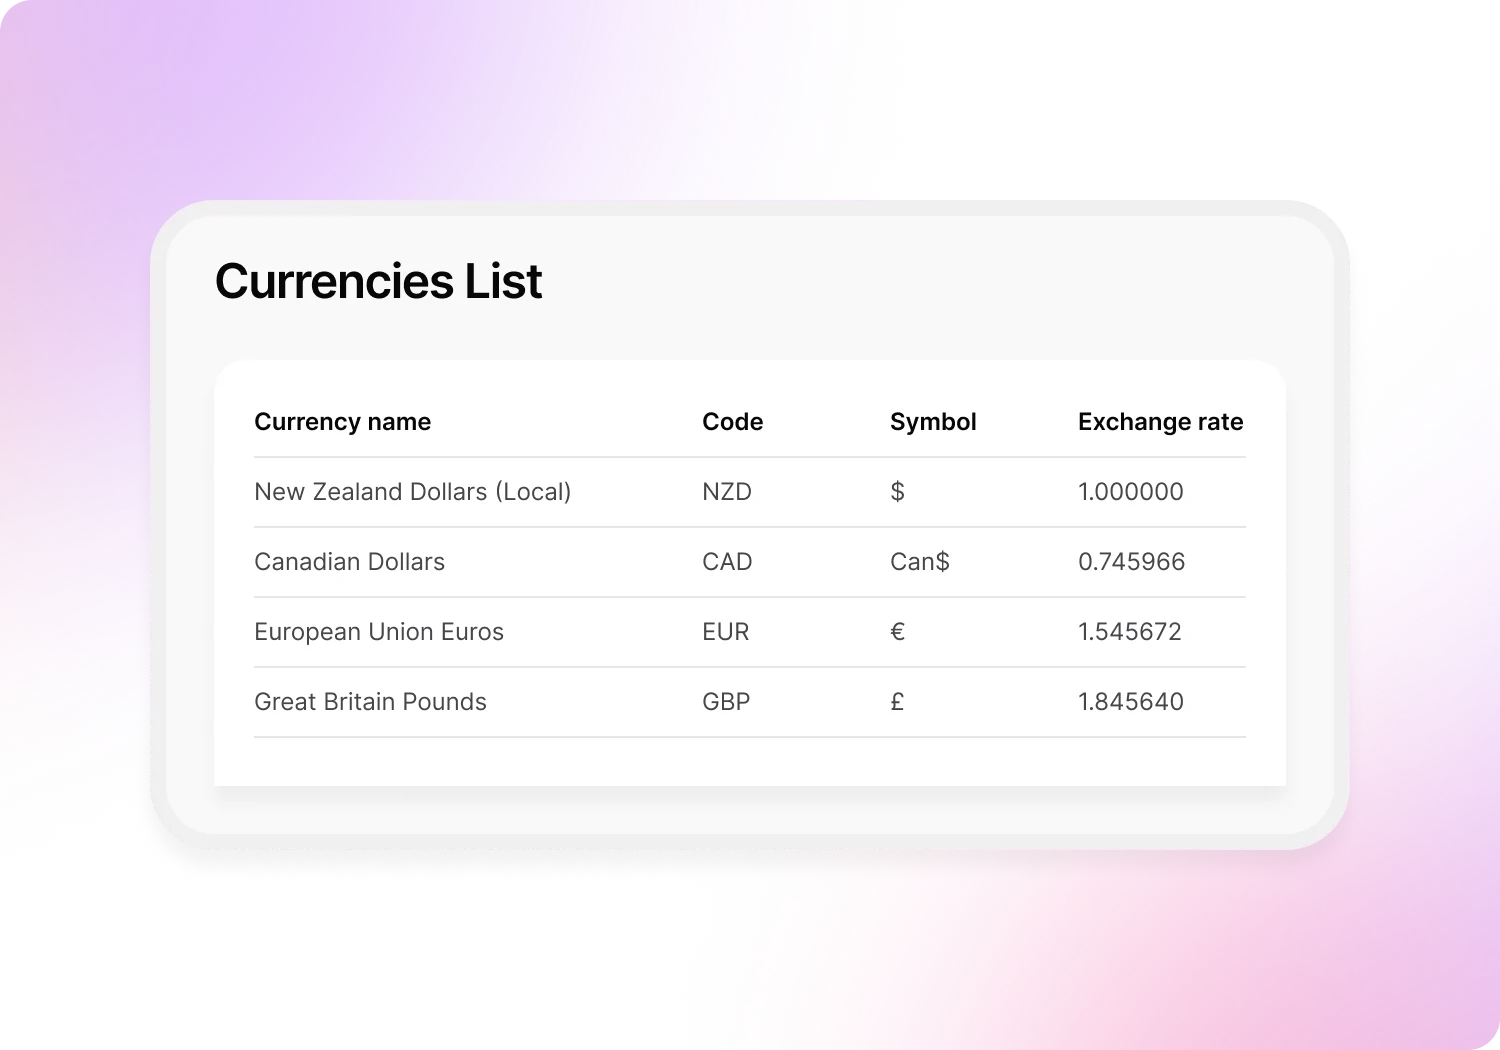 Currency list shows currency name, code, symbol and current exchange rate